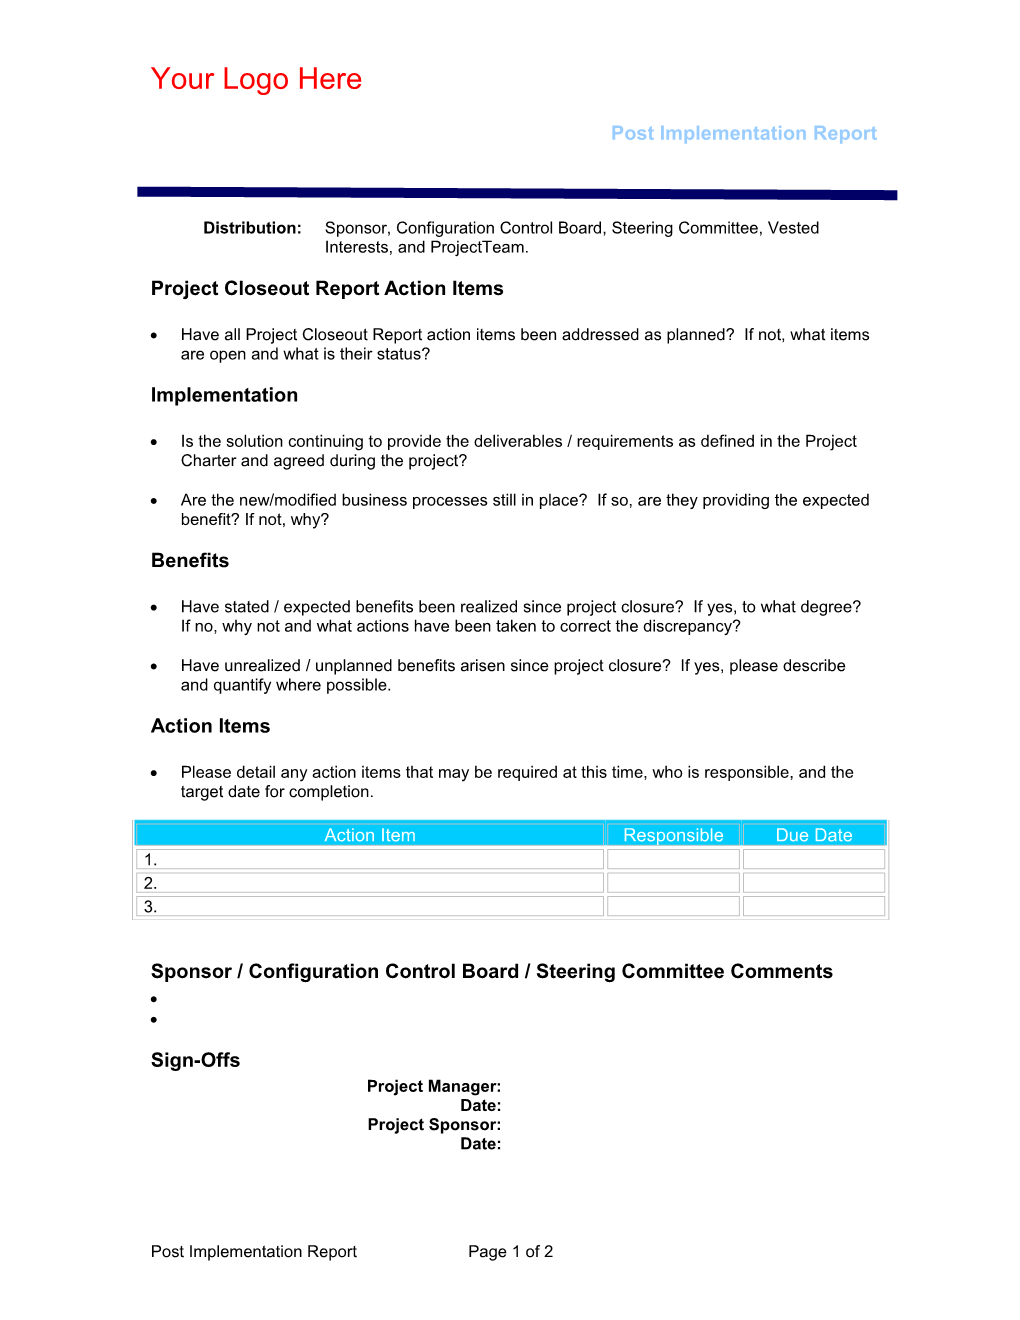 Project Closeout Report Action Items